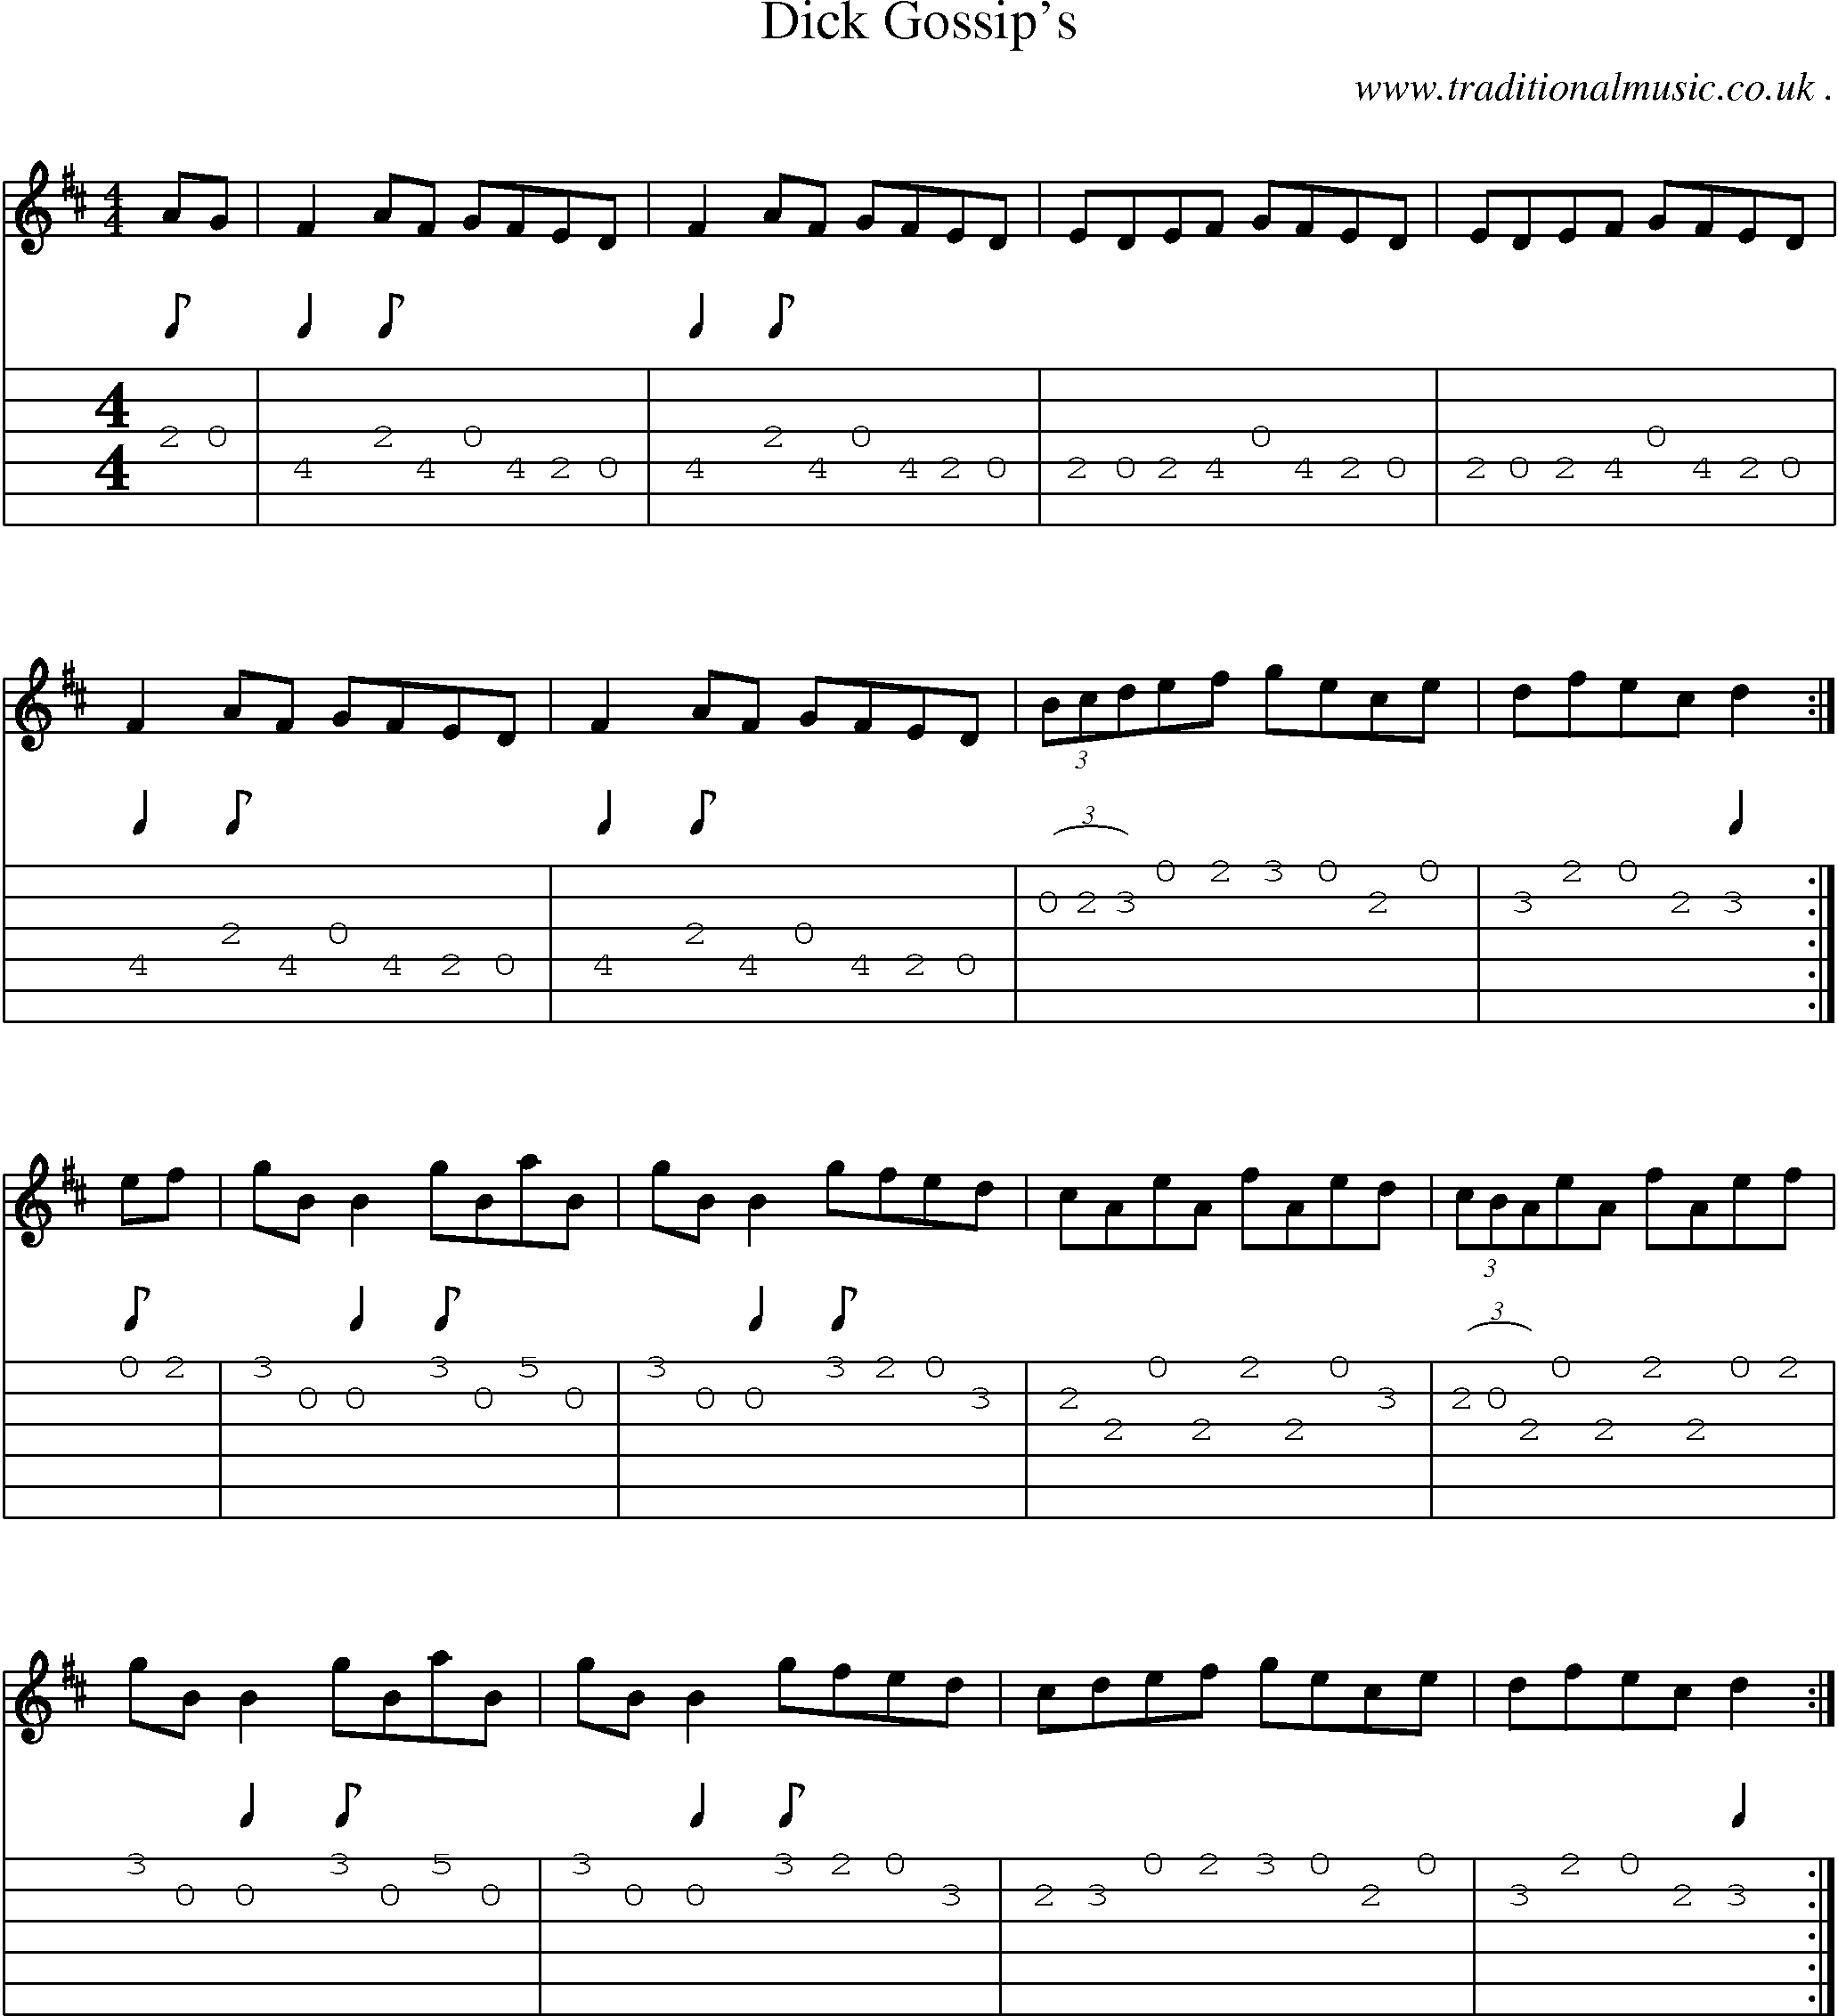 Sheet-Music and Guitar Tabs for Dick Gossips